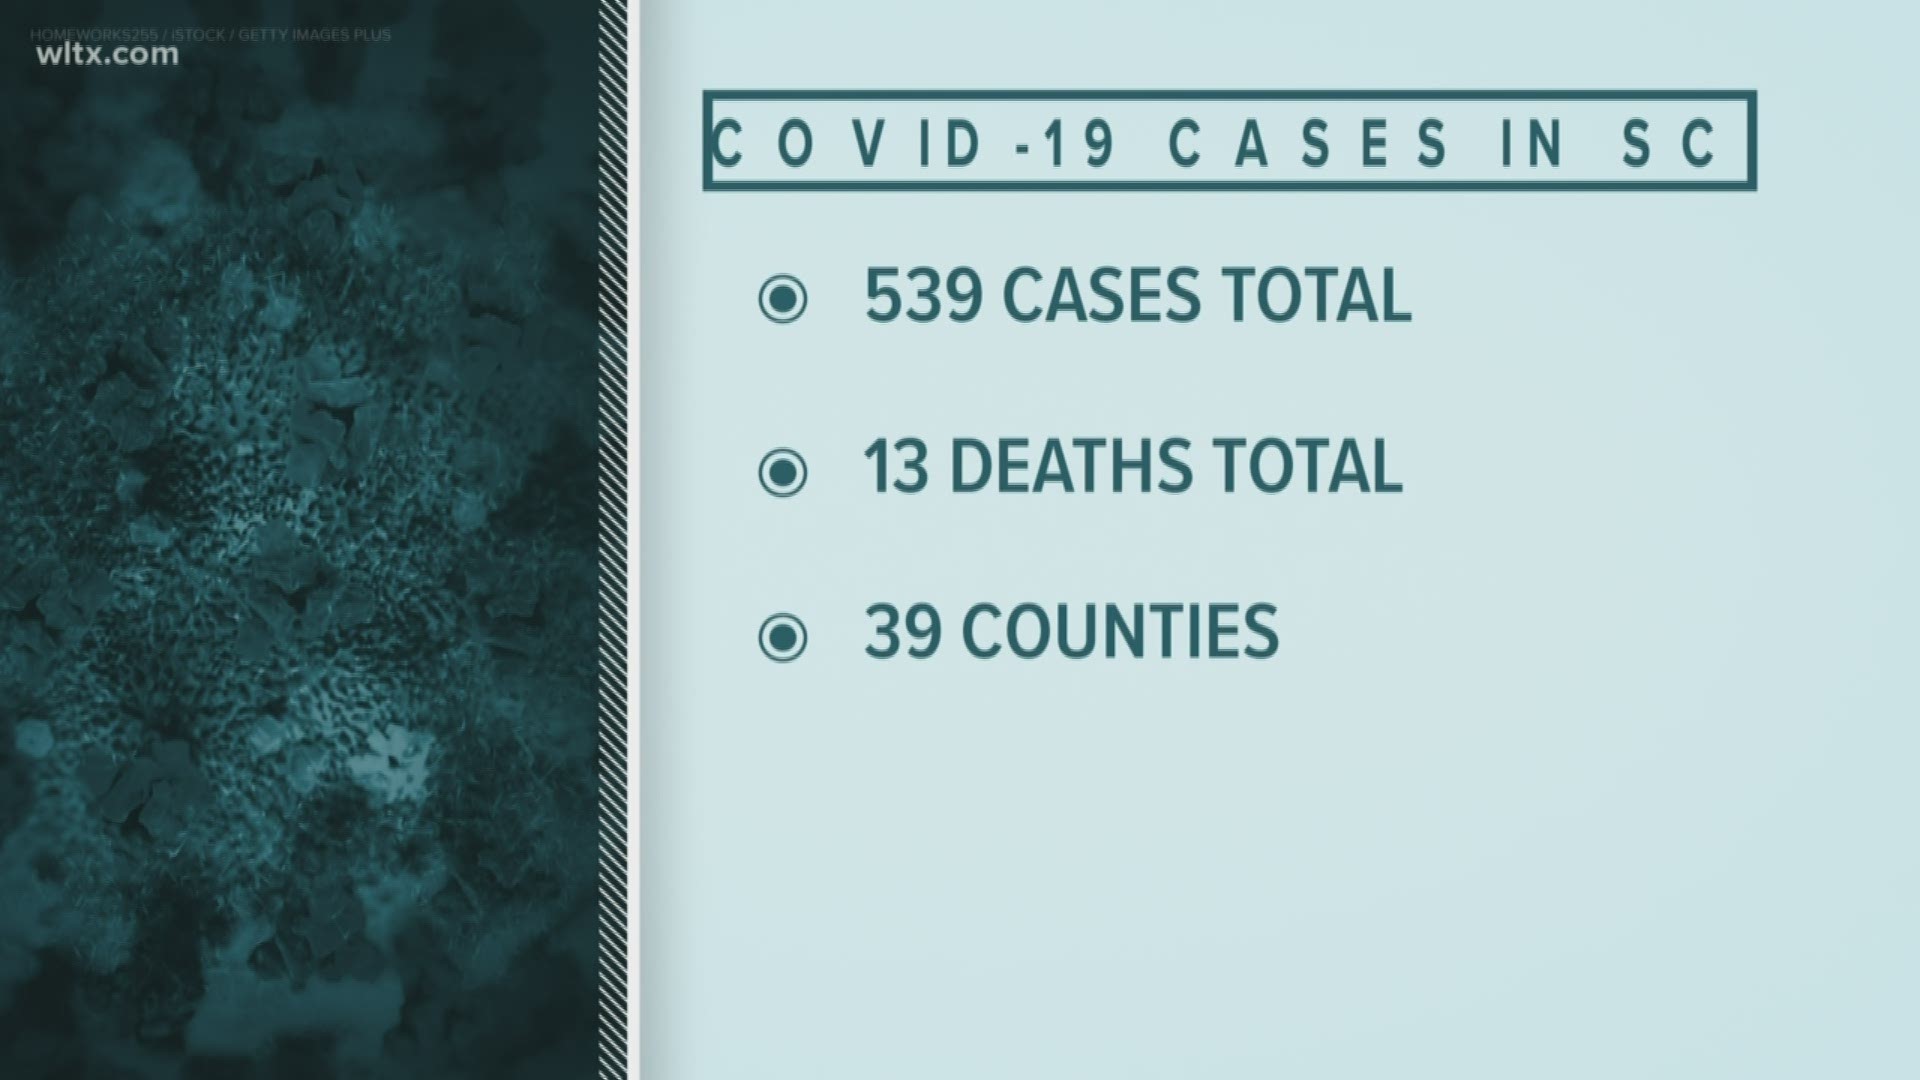 The new numbers bring the total number of cases to 539 cases in 39 counties and total deaths to 13.